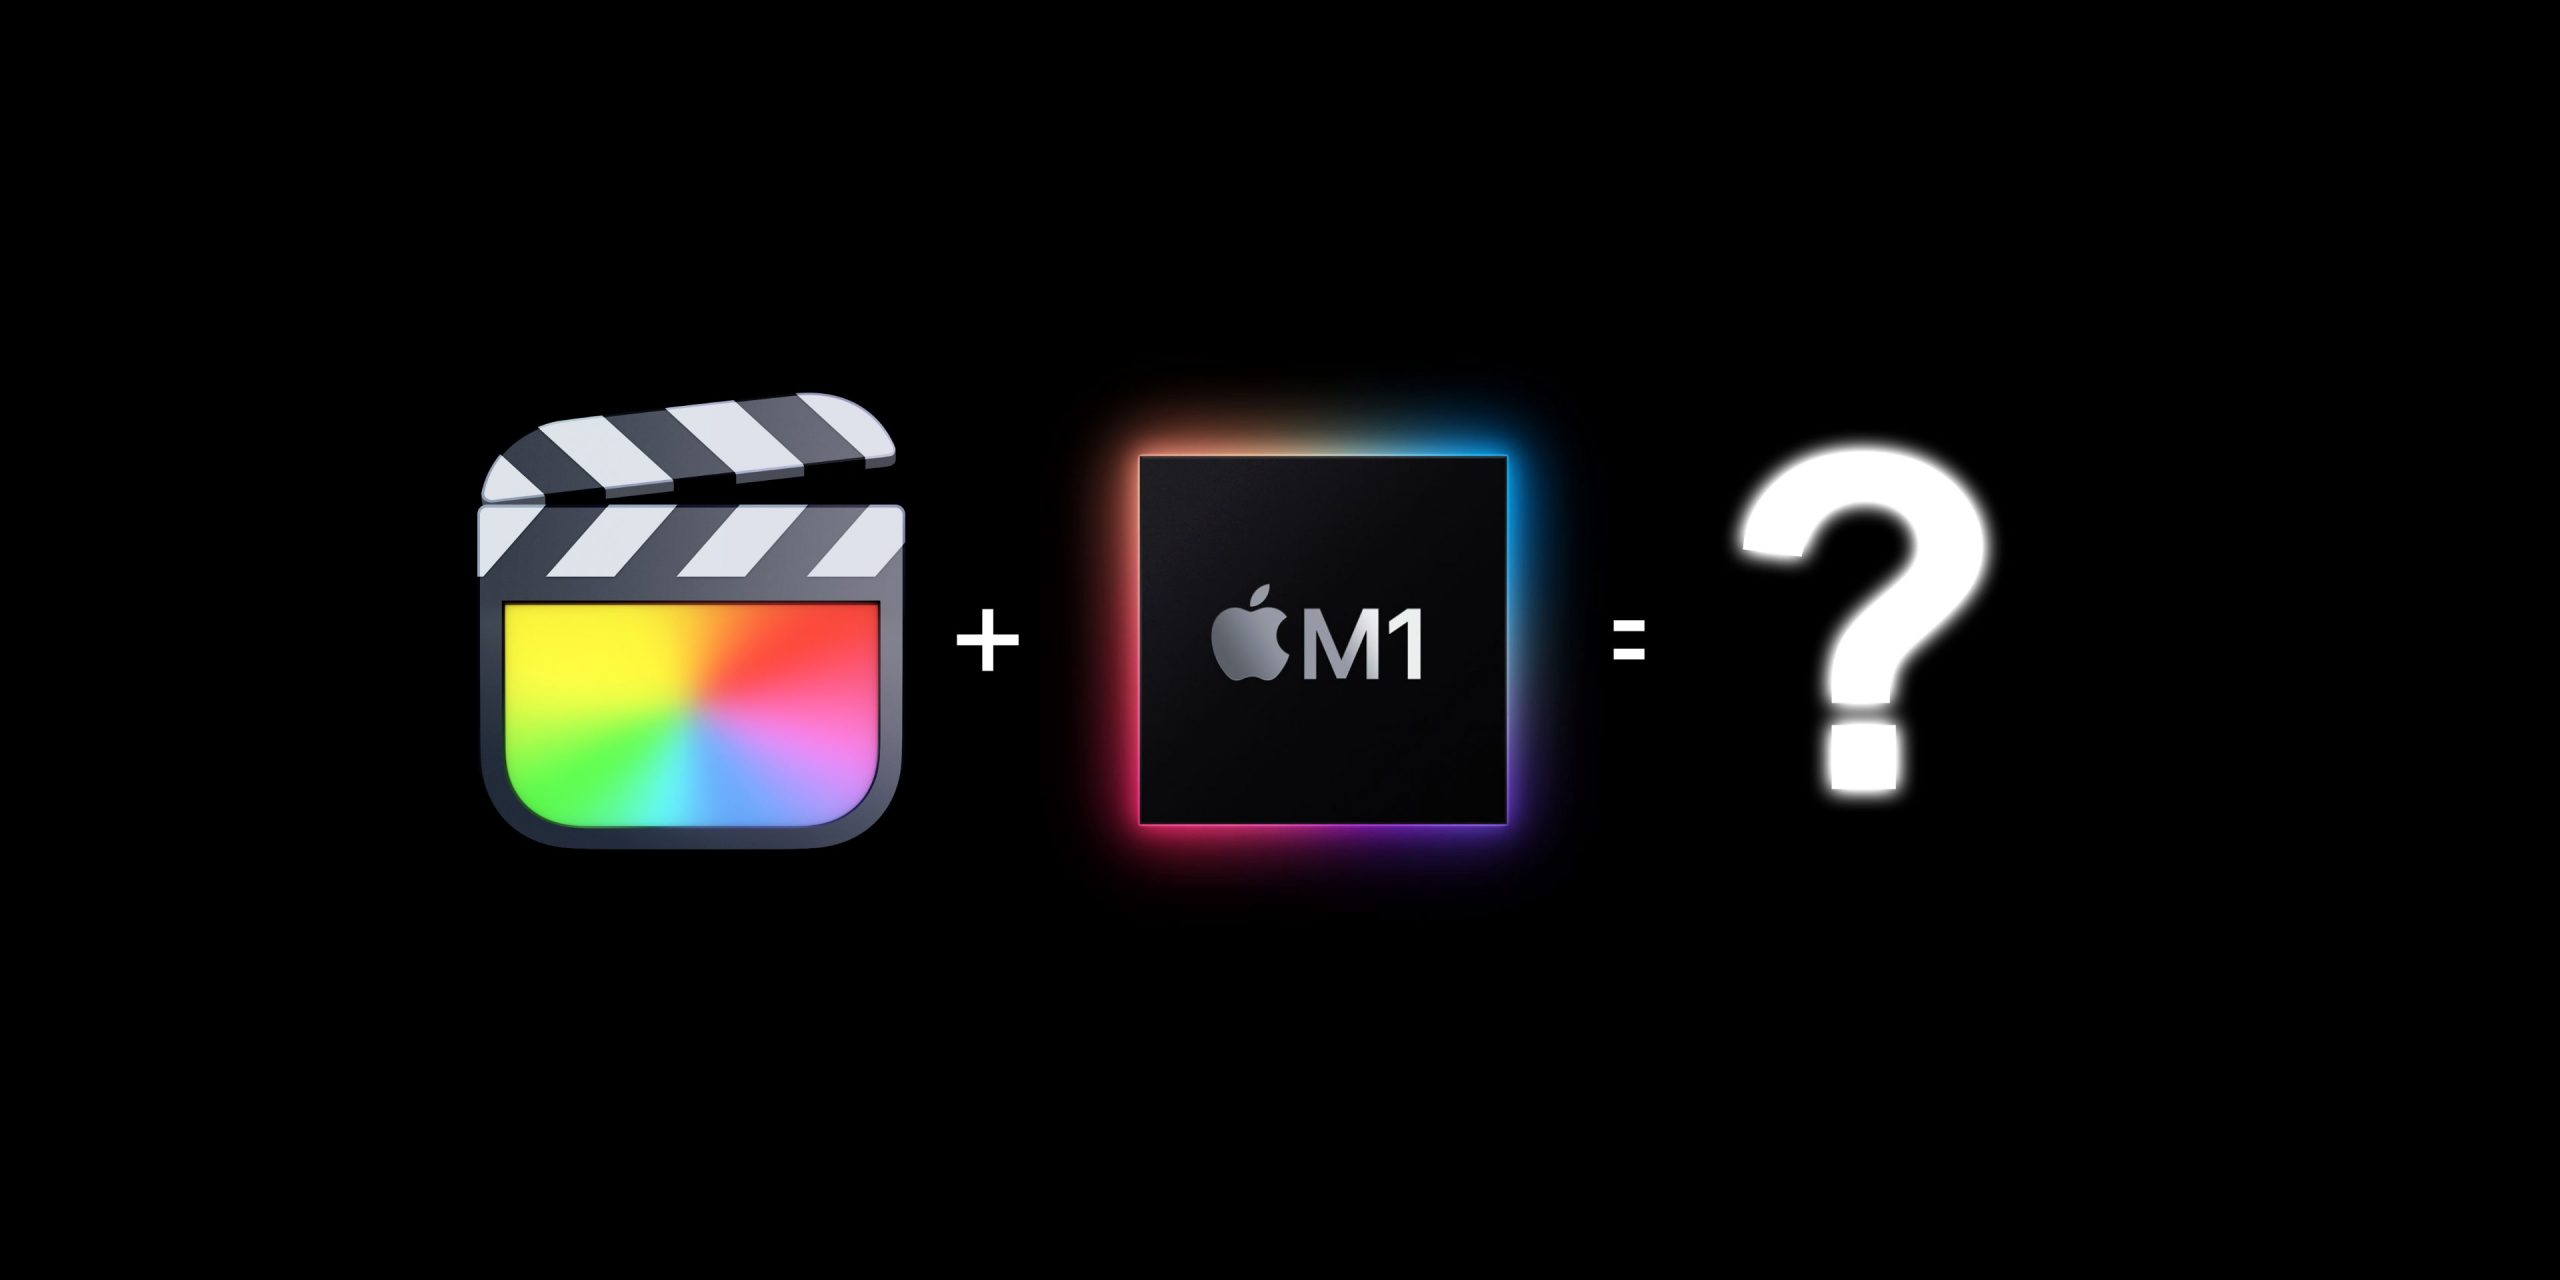 Why Final Cut Pro users should be excited about Apple Silicone